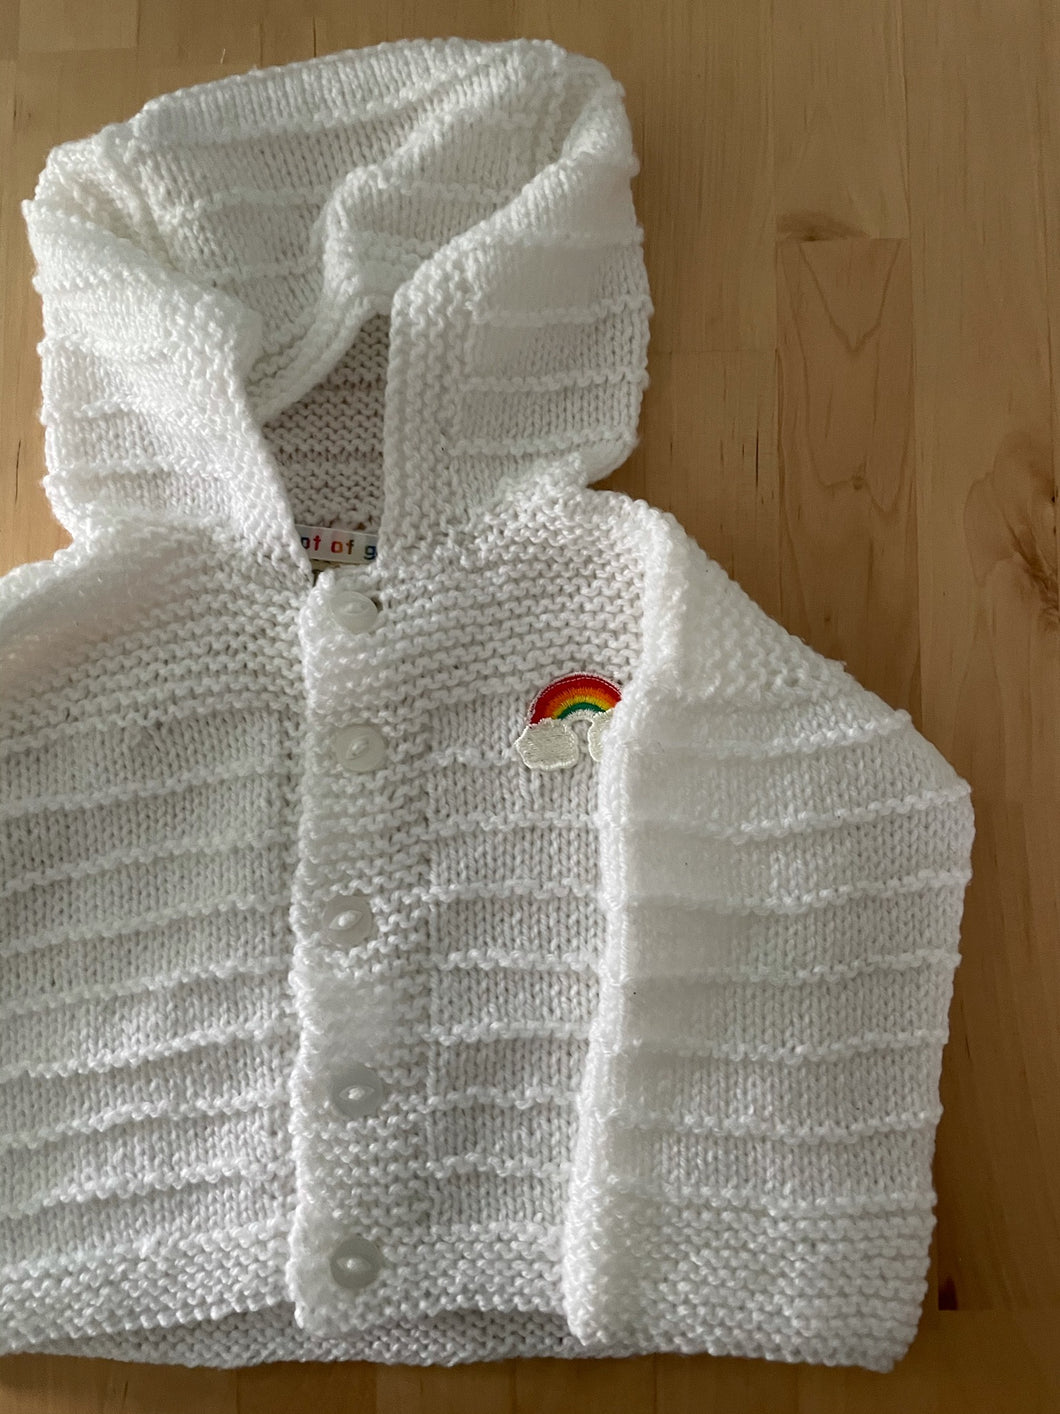 0-3 months - White rainbow hooded knit